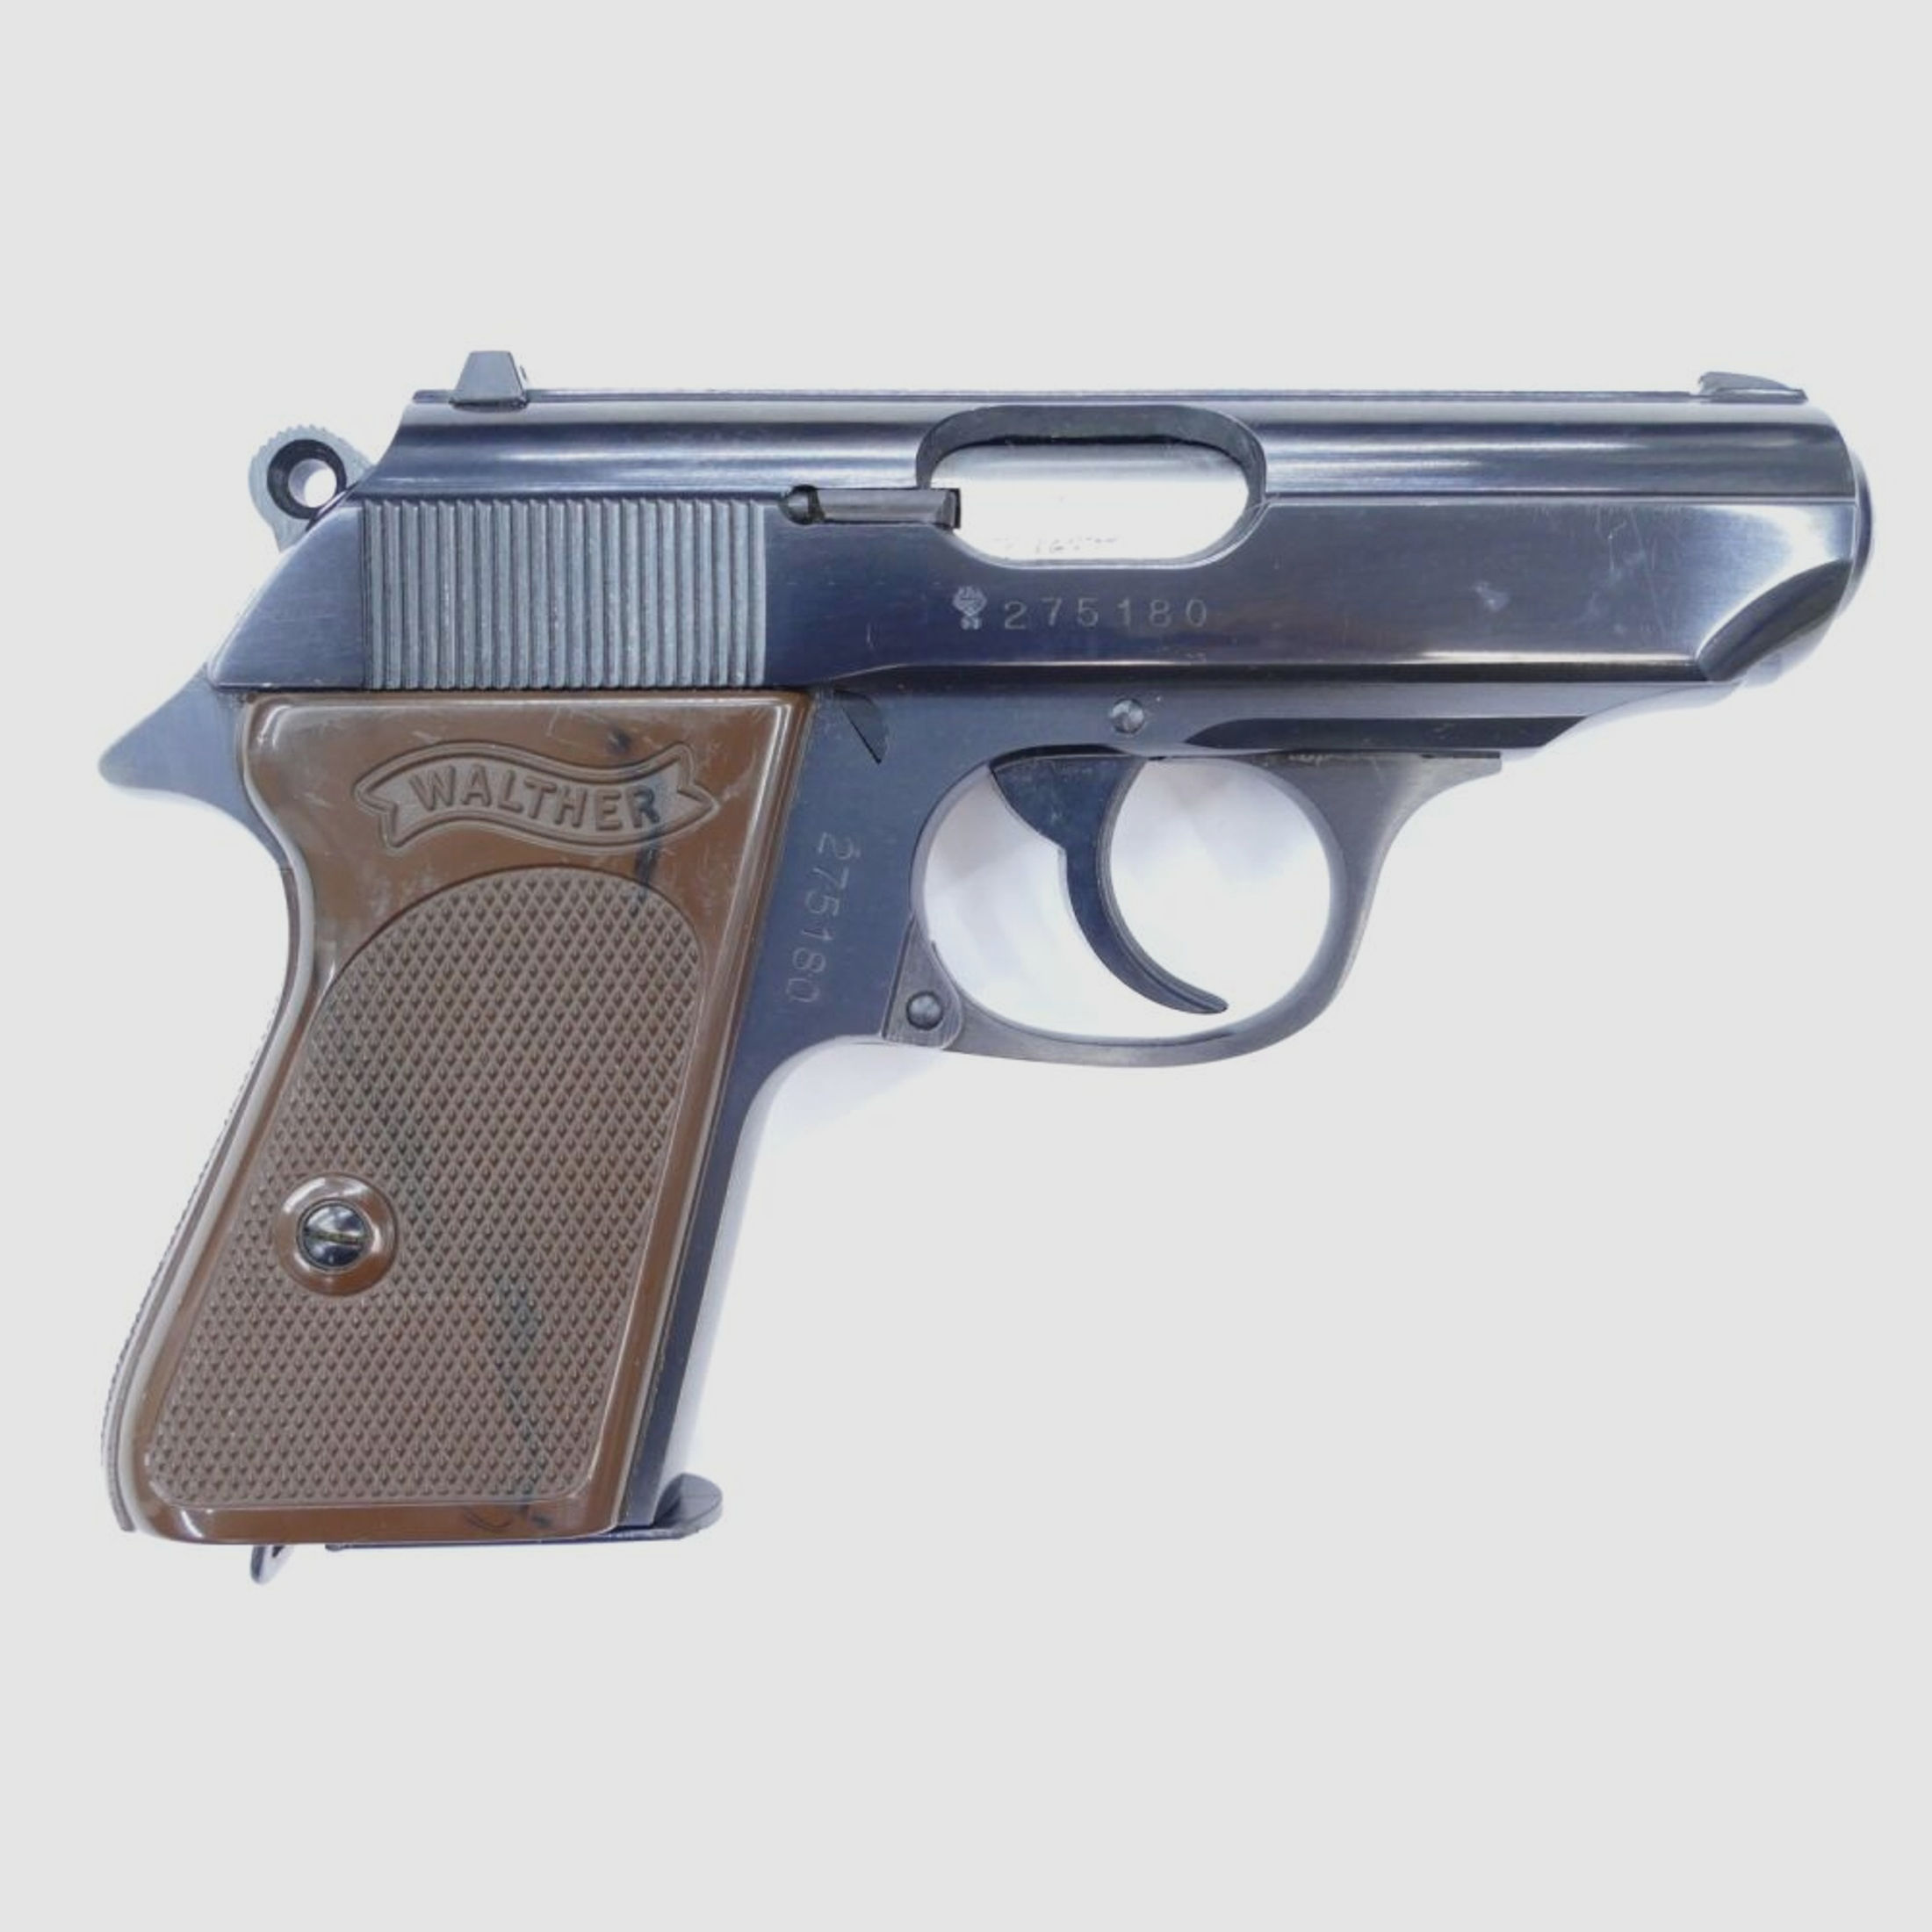 Walther	 PPK 7,65mm